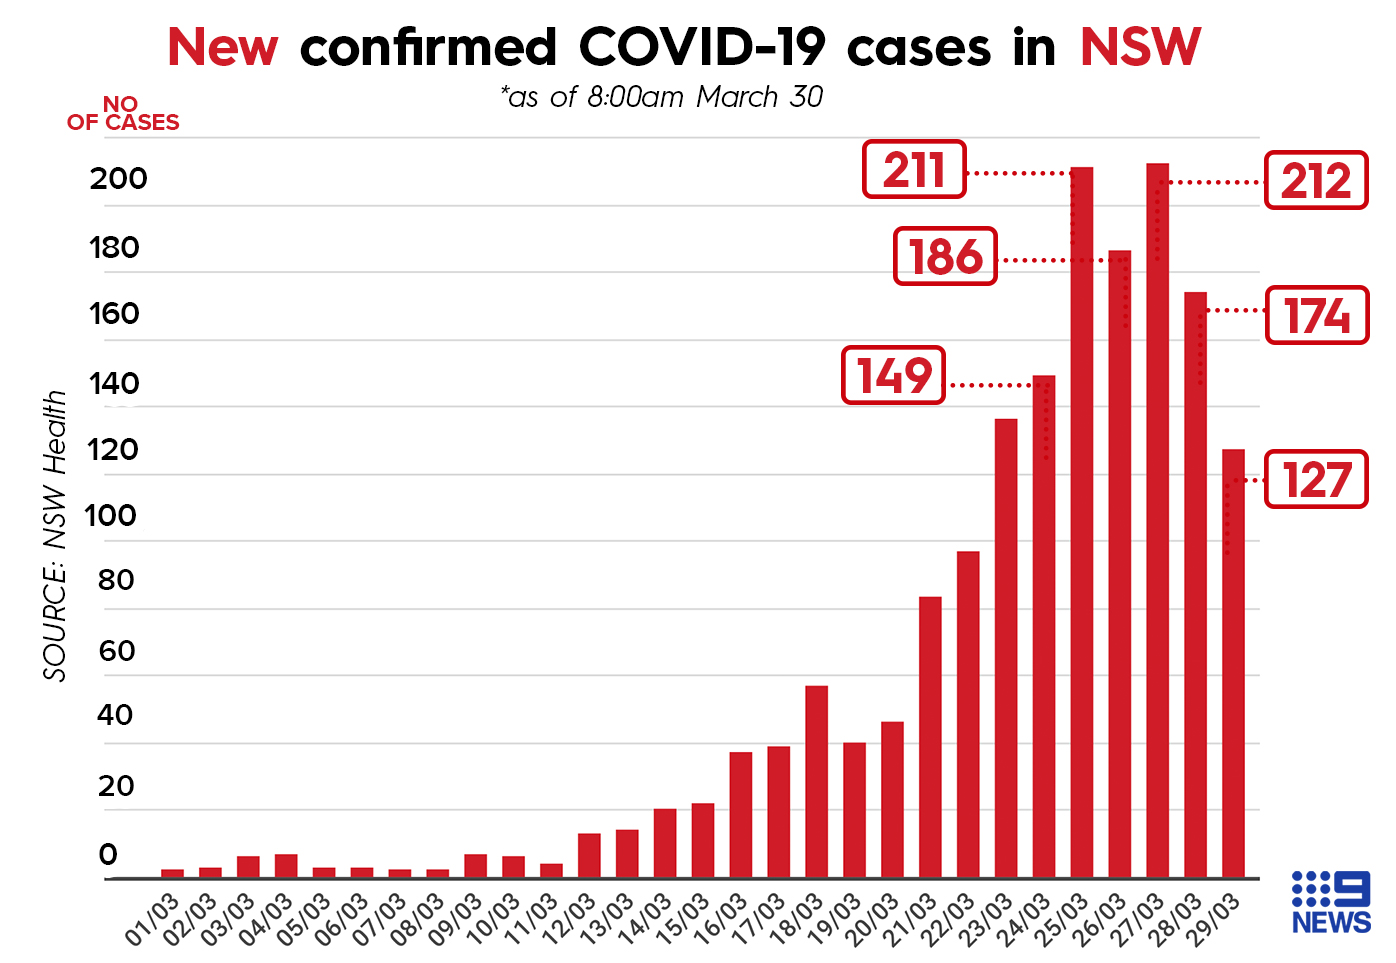 NSW Health have cautioned the public not to get too excited over the recent drop in COVID-19 cases in the state. 